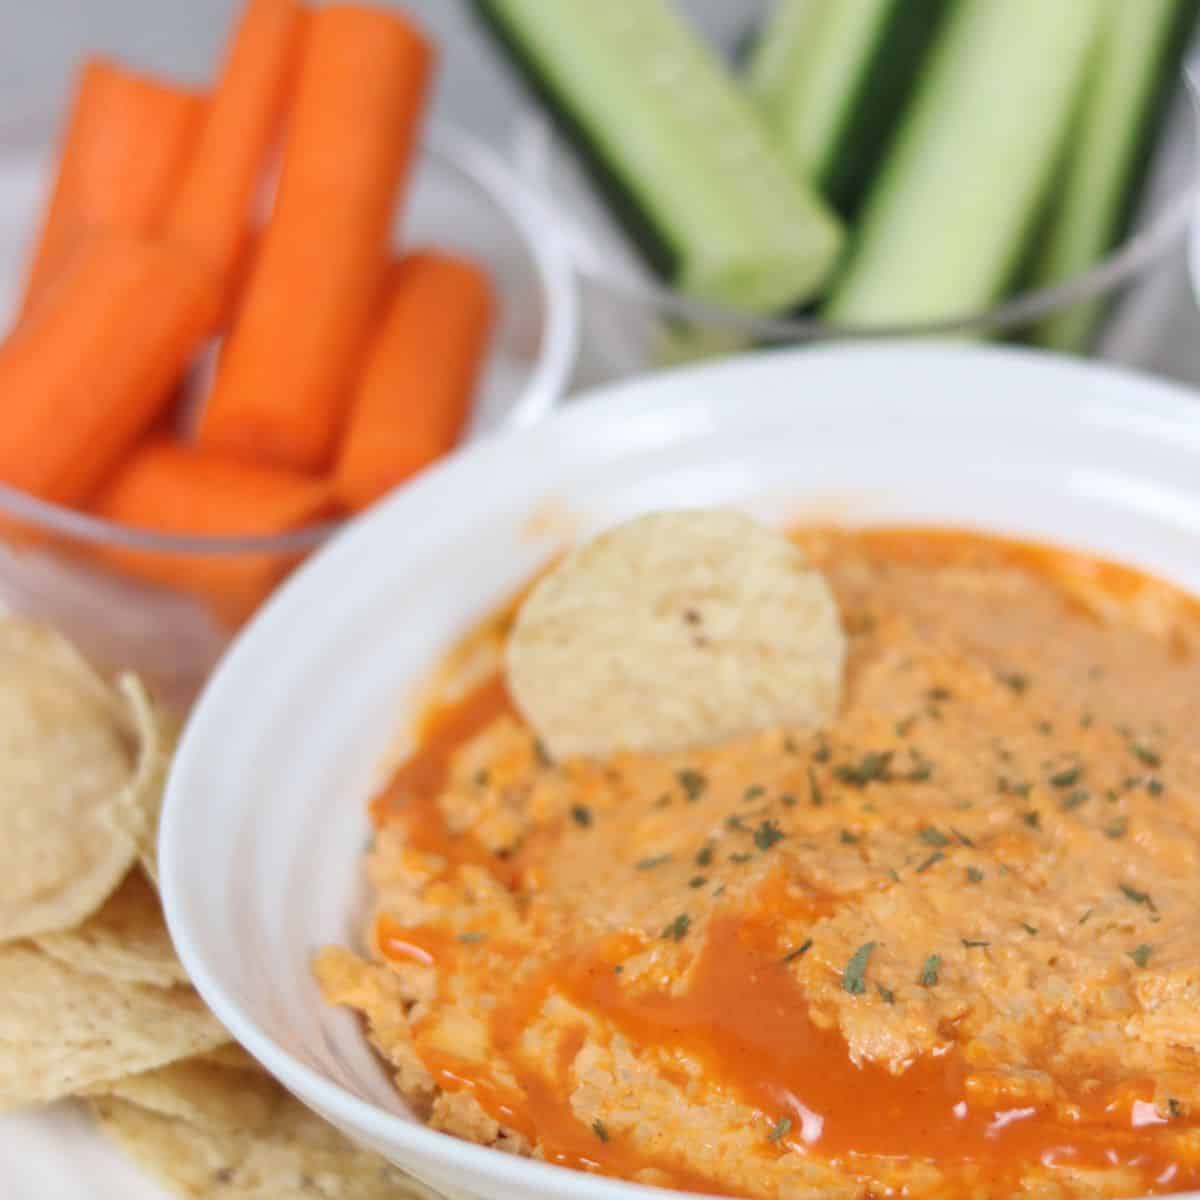 buffalo chickpea dip in a bowl with vegetables around it